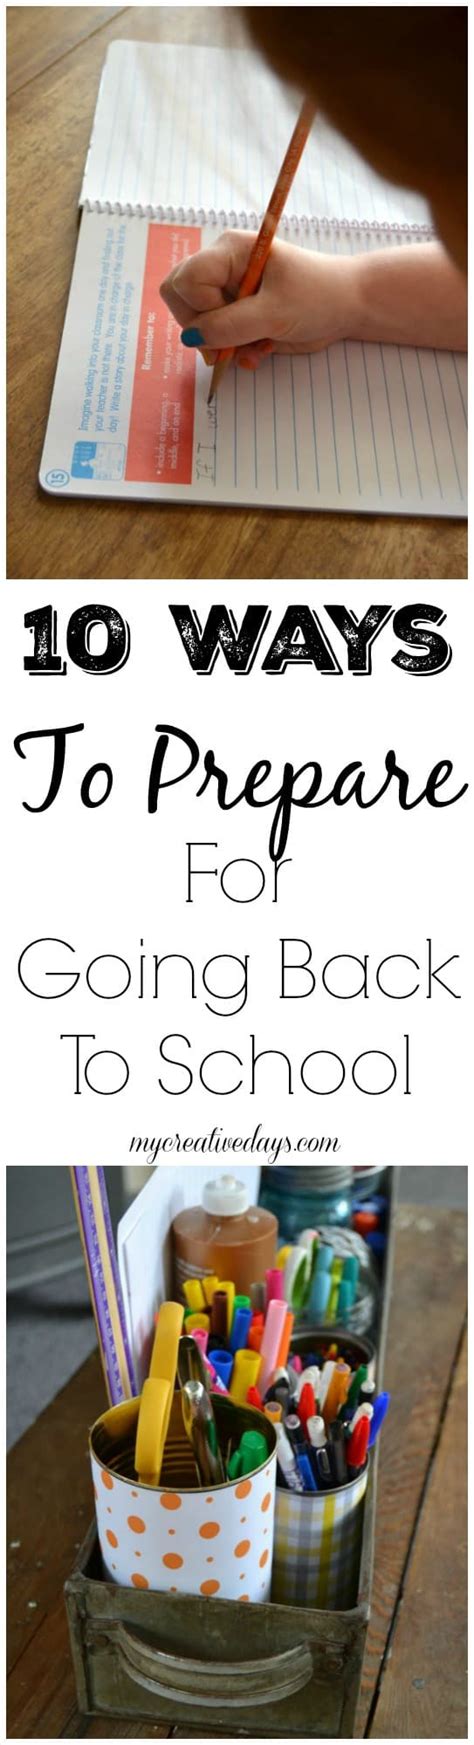 10 Ways To Prepare For Going Back To School To Make It Easier